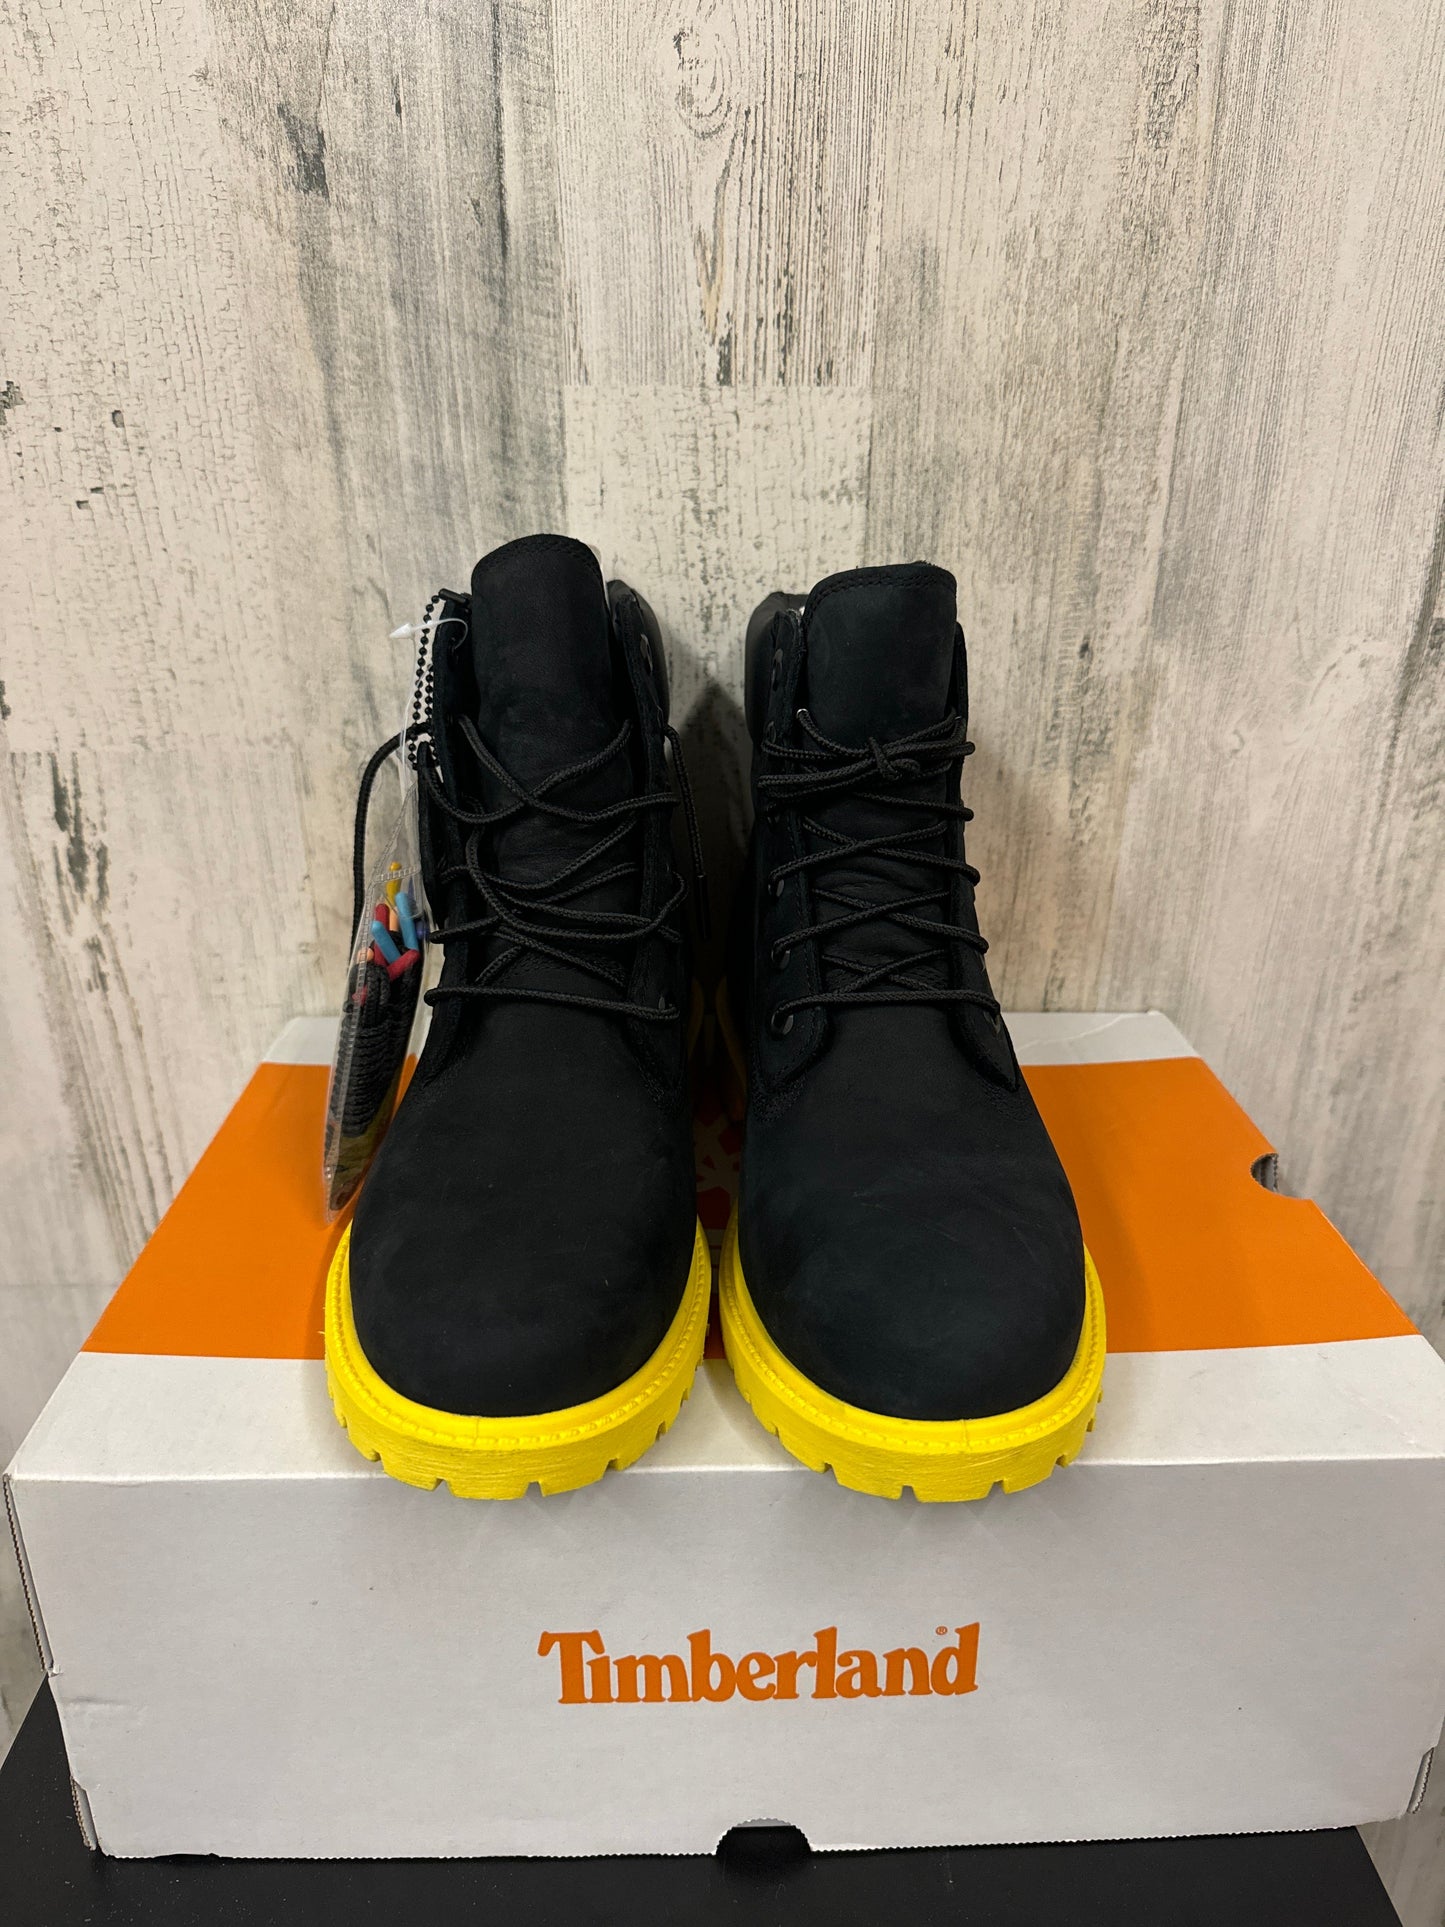 Black Boots Ankle Flats Timberland, Size 8.5